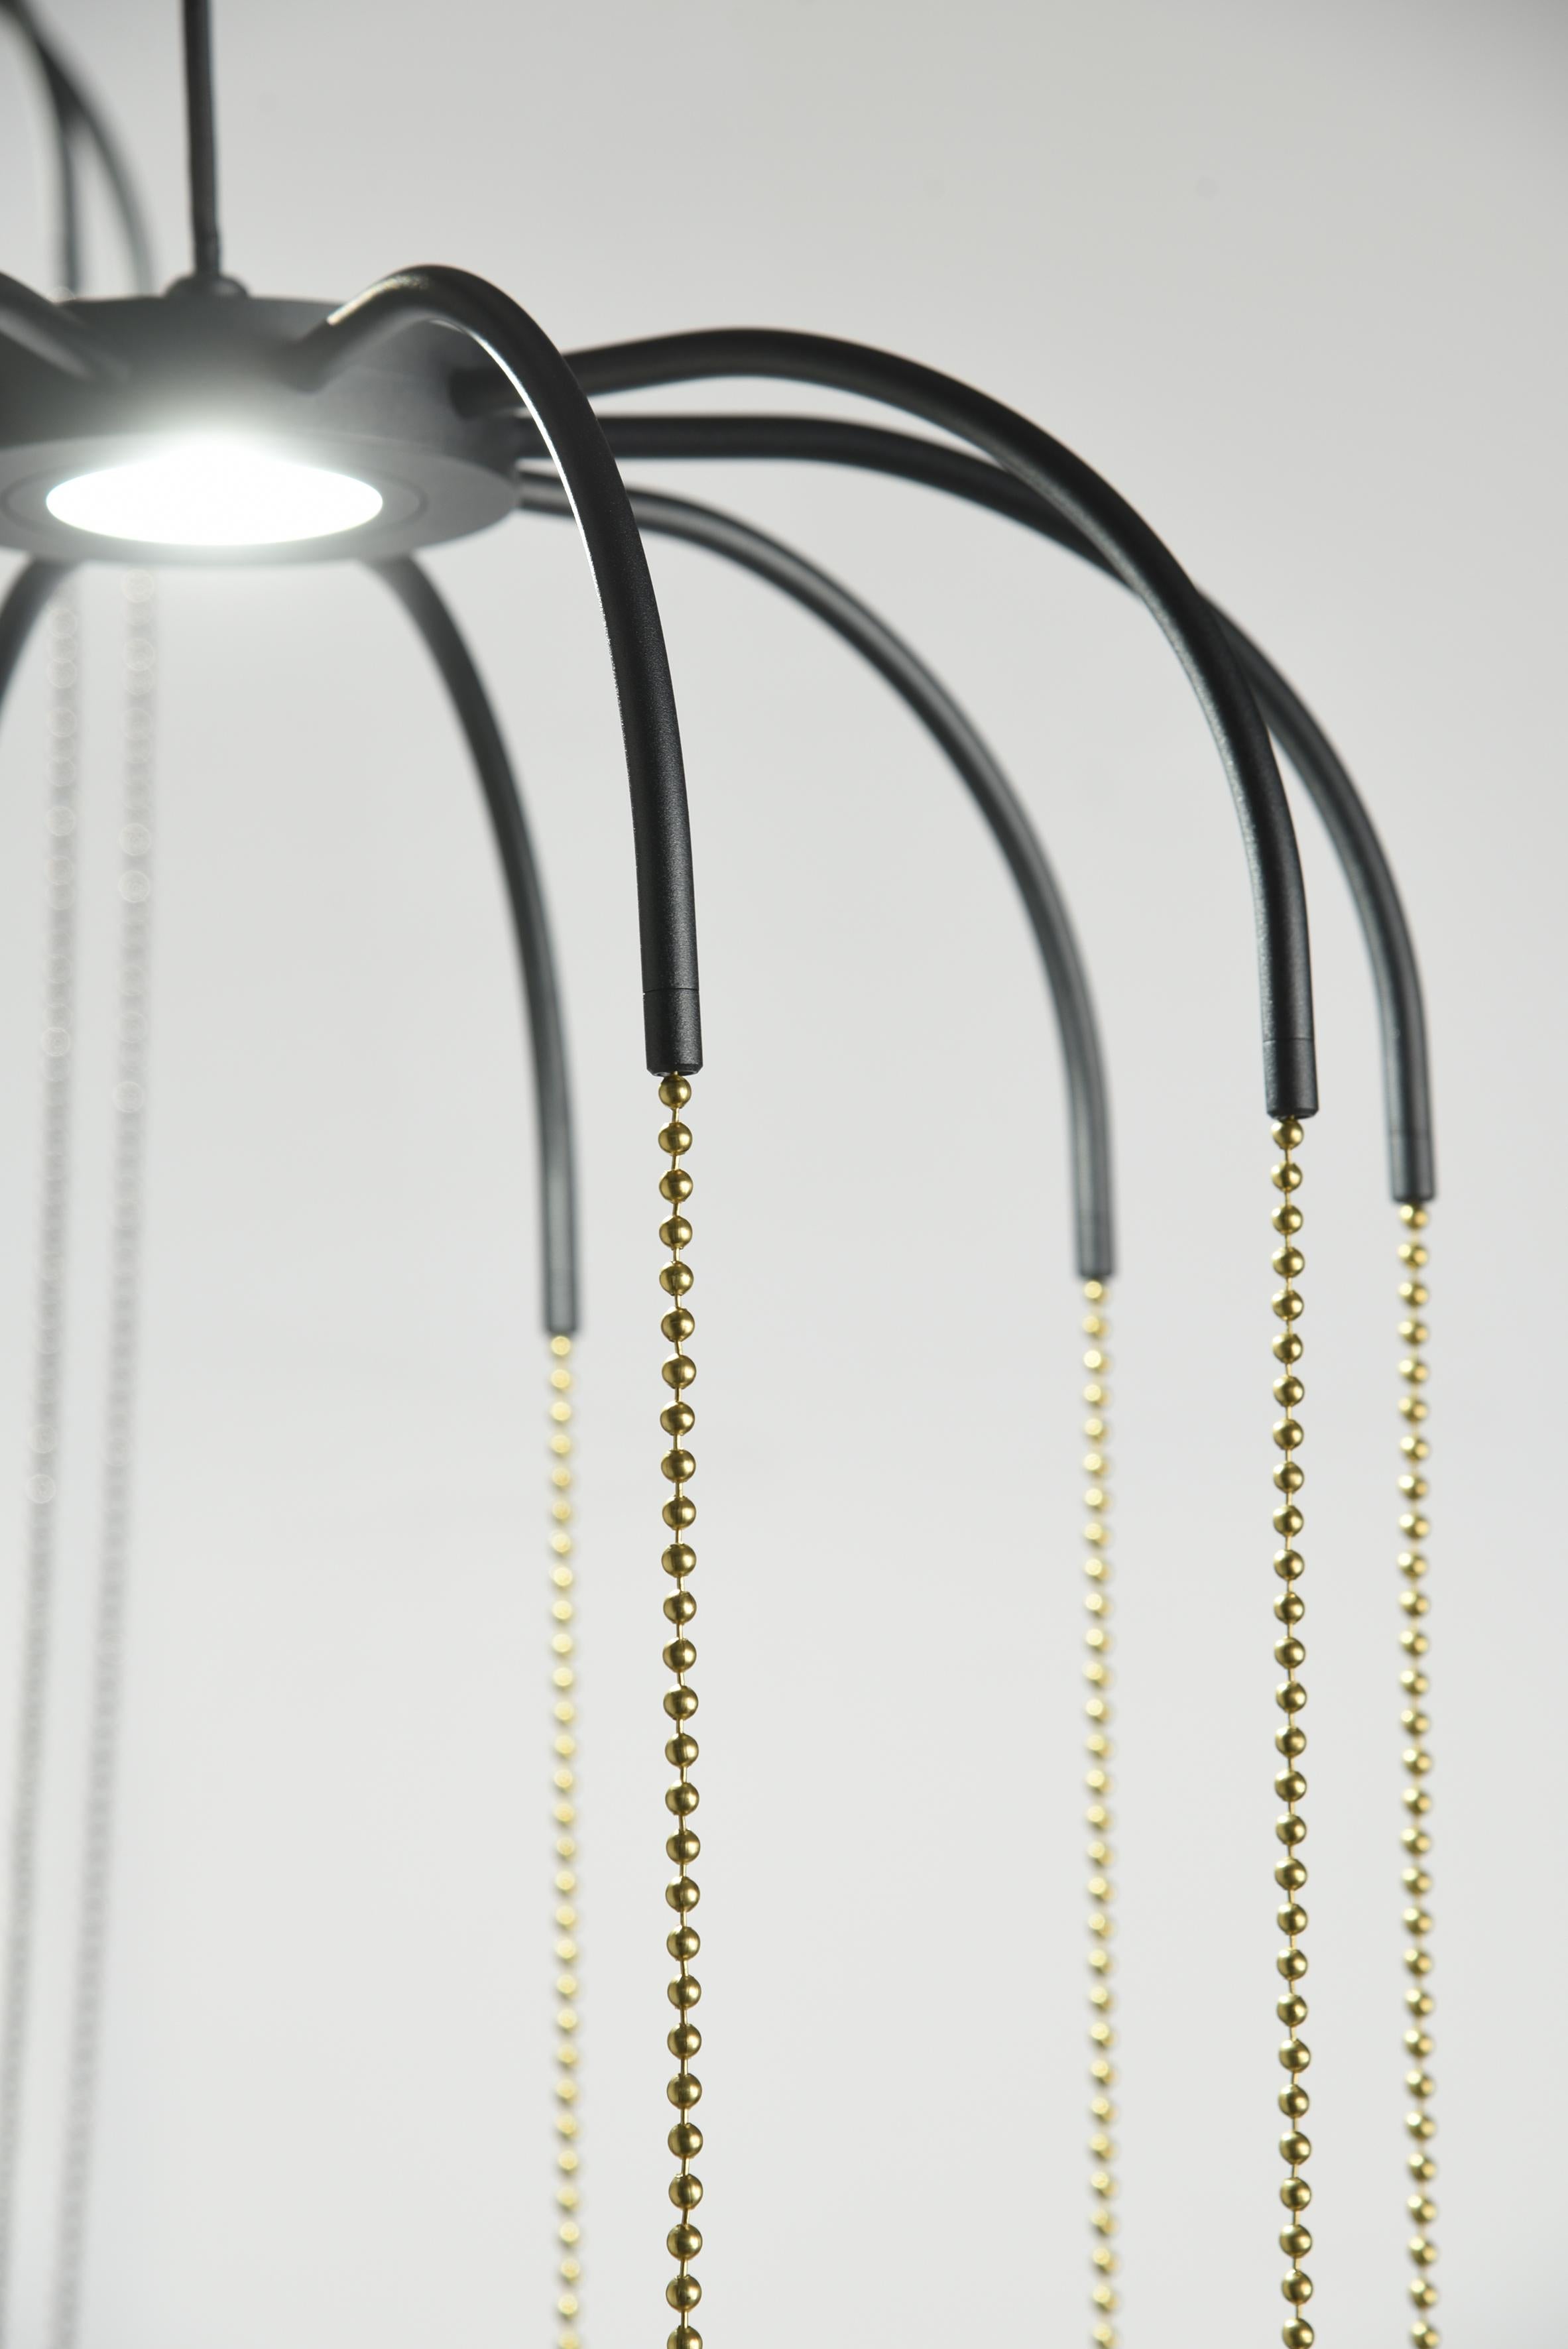 Contemporary Axolight Alysoid Large Pendant Lamp in Anthracite Grey with Brass Chains For Sale